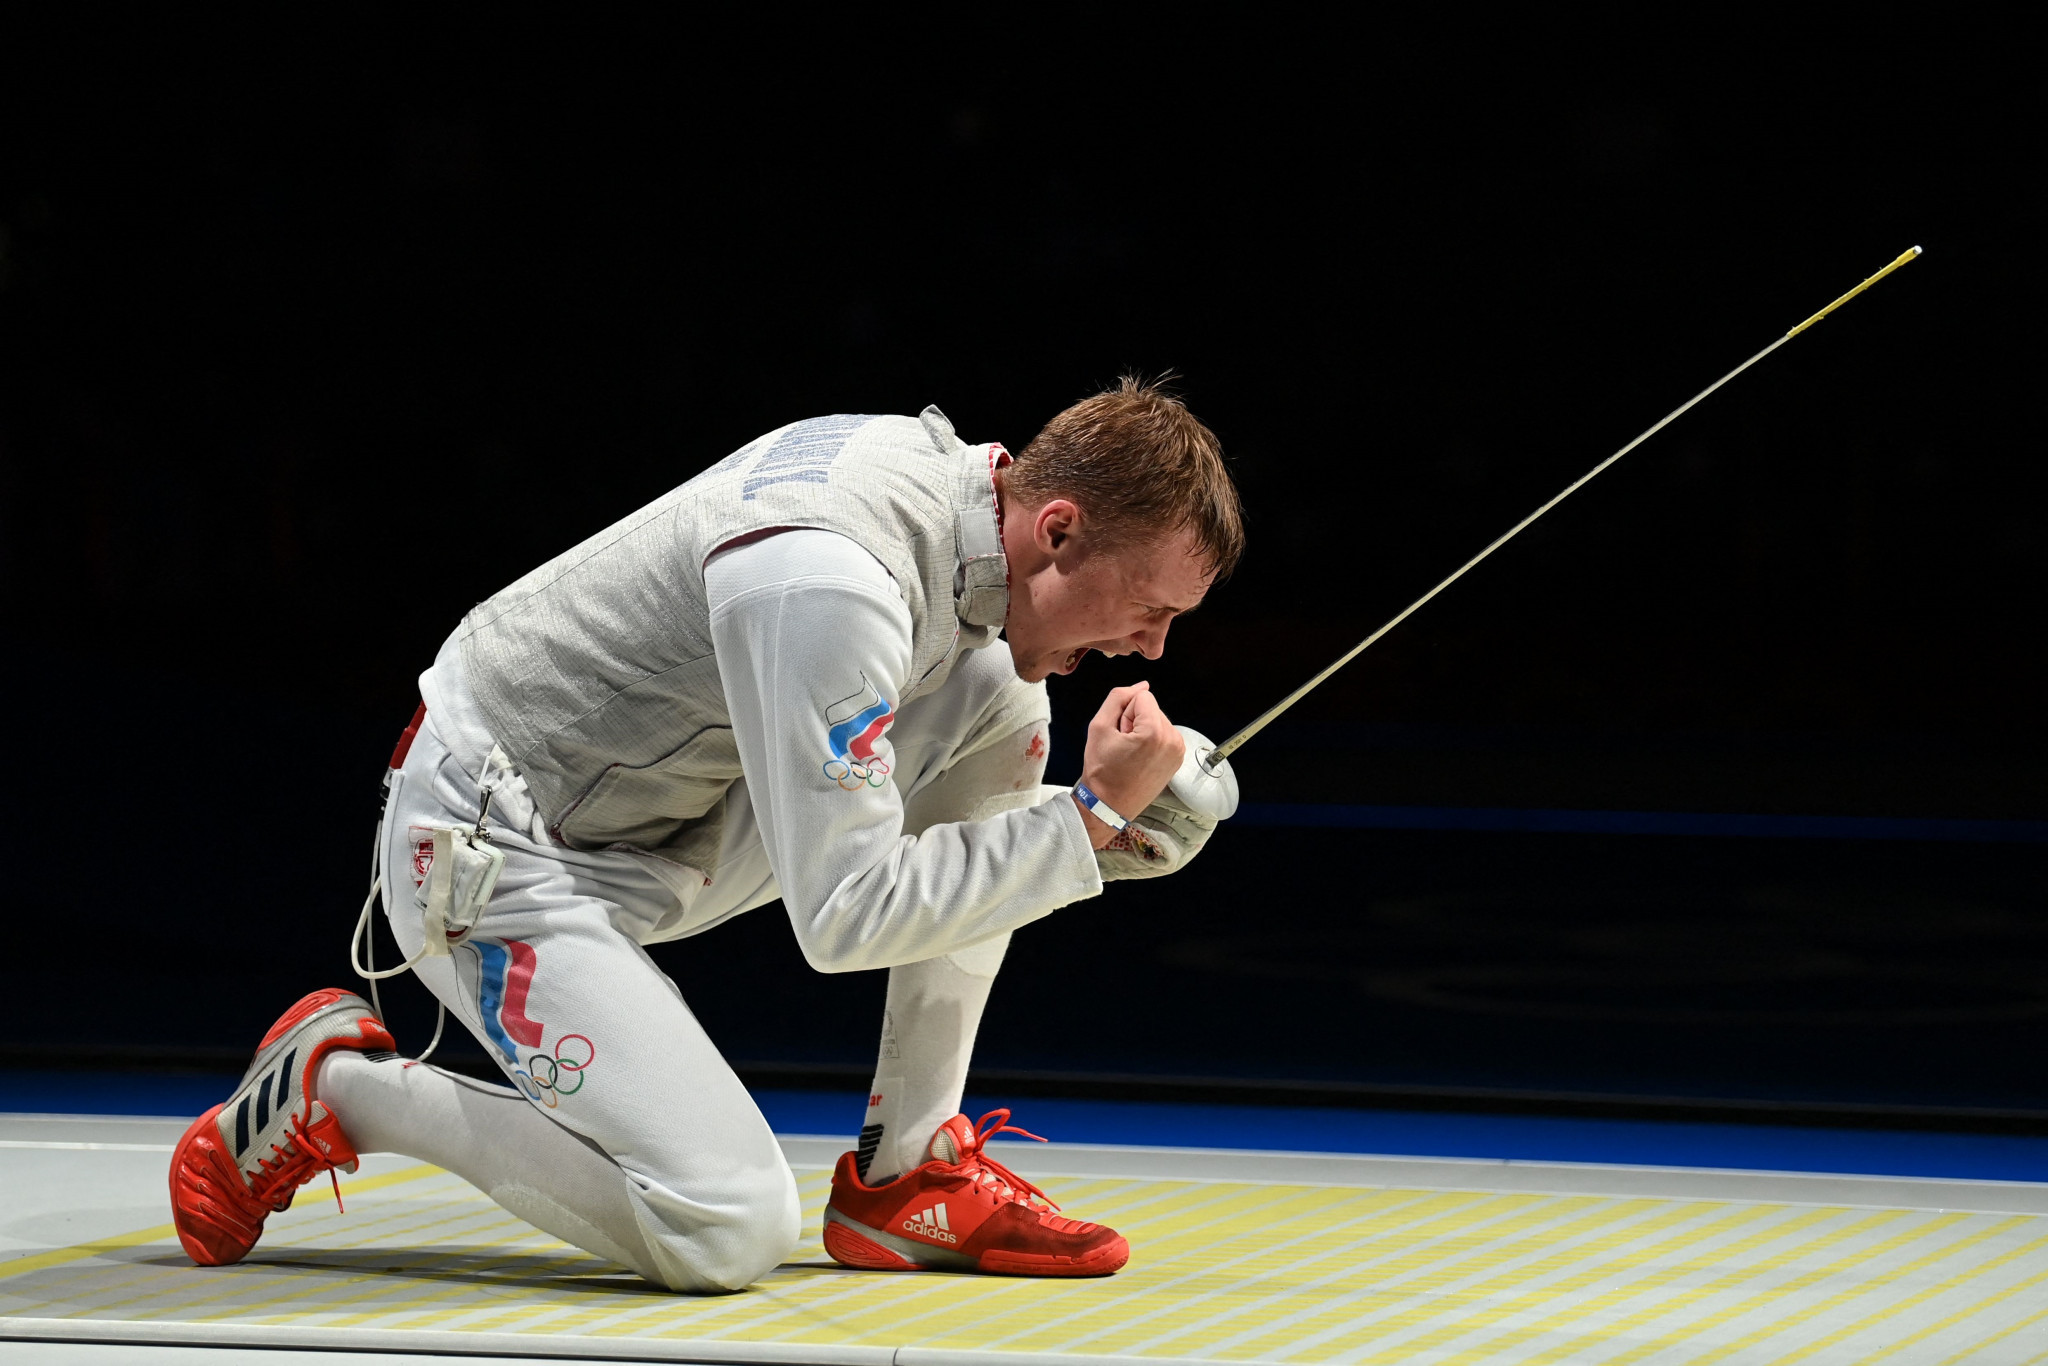 Russian fencers have been banned from competition by the FIE and EFC in response to the country's invasion of Ukraine ©Getty Images